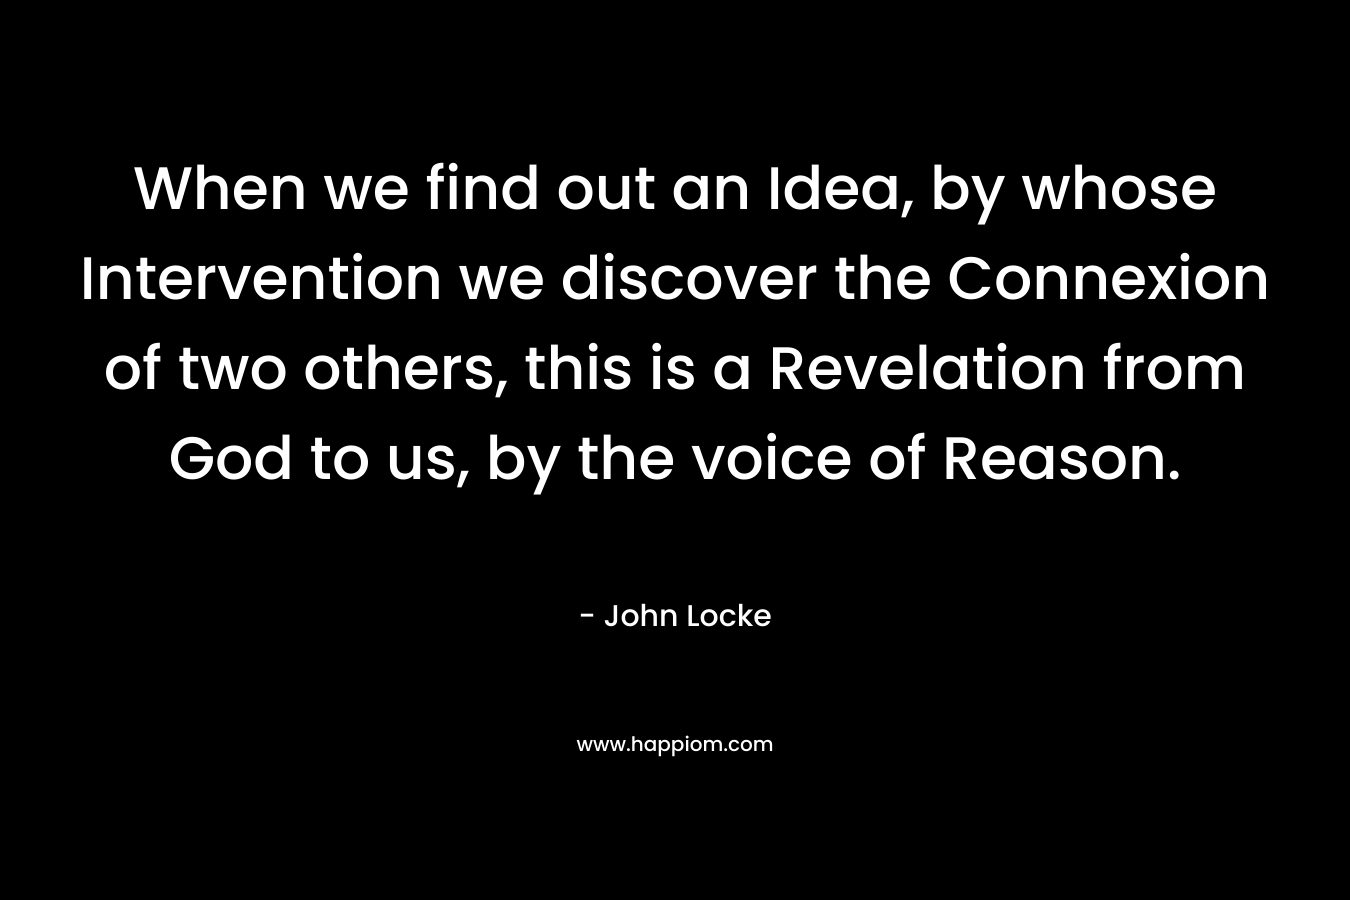 When we find out an Idea, by whose Intervention we discover the Connexion of two others, this is a Revelation from God to us, by the voice of Reason. – John Locke